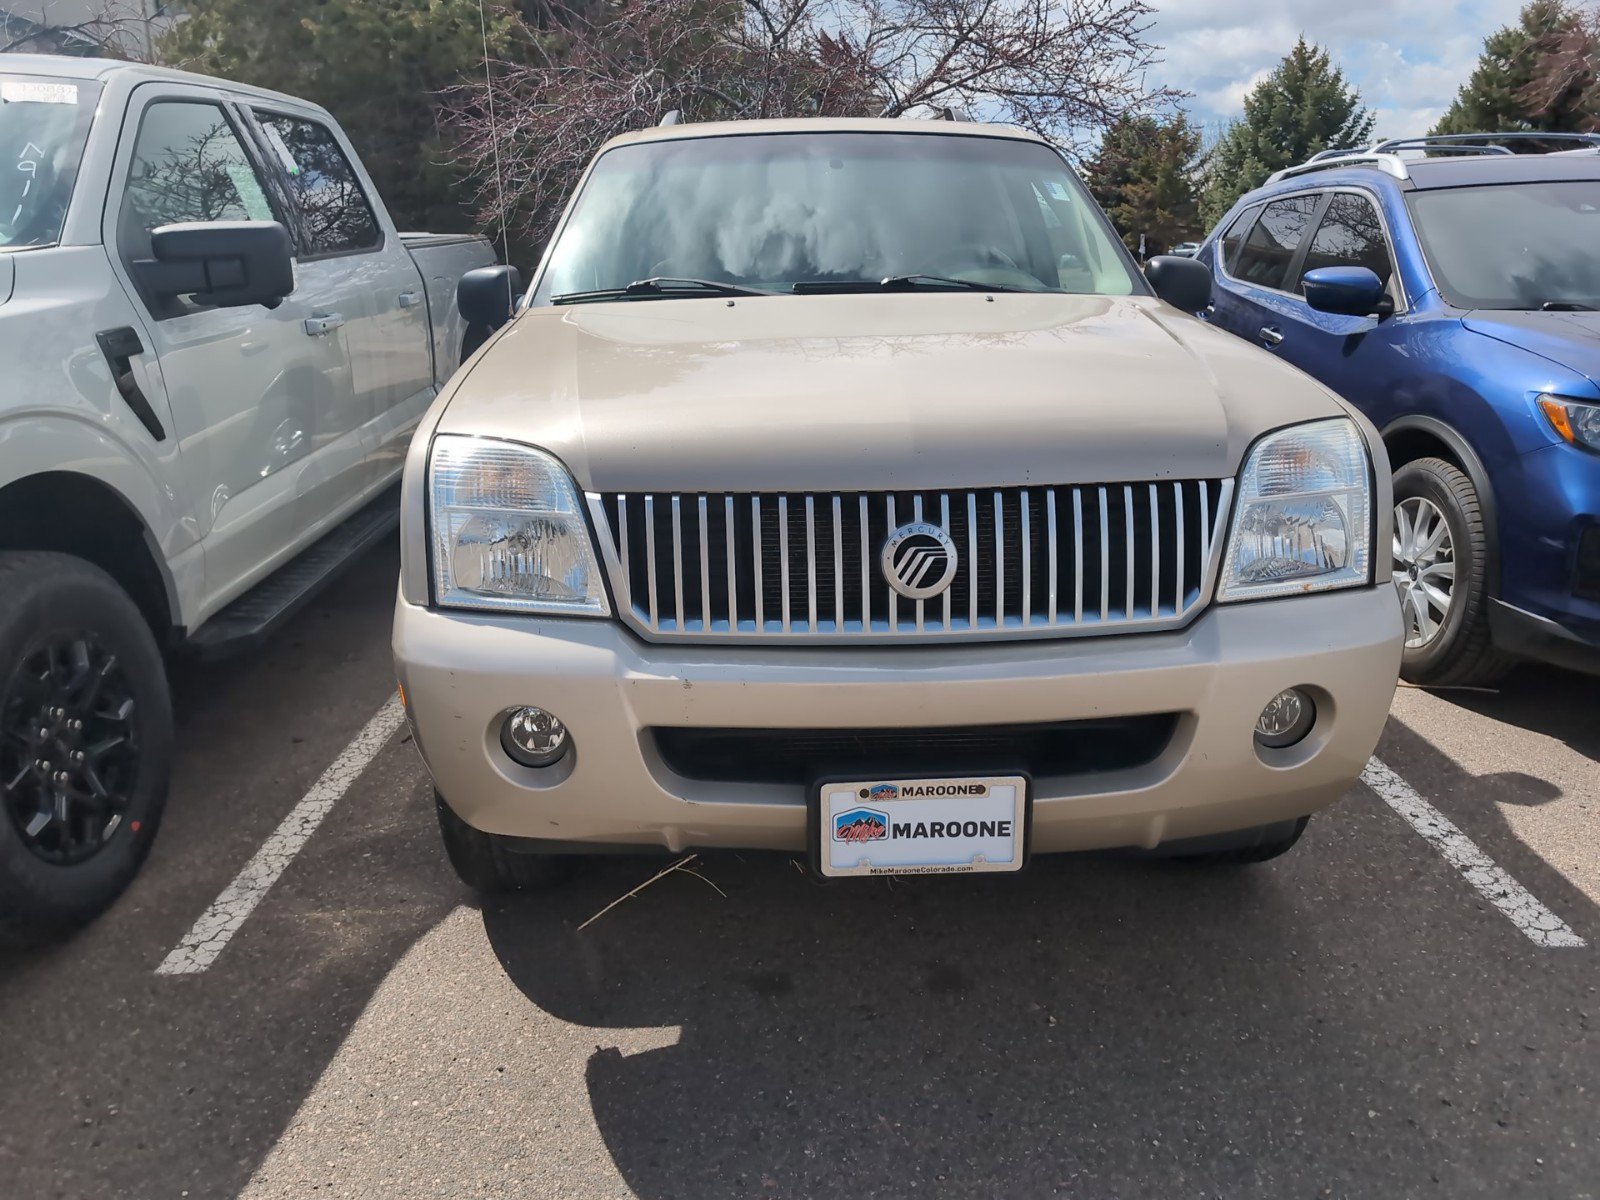 Used 2005 Mercury Mountaineer Convenience with VIN 4M2DU86W35ZJ08948 for sale in Longmont, CO